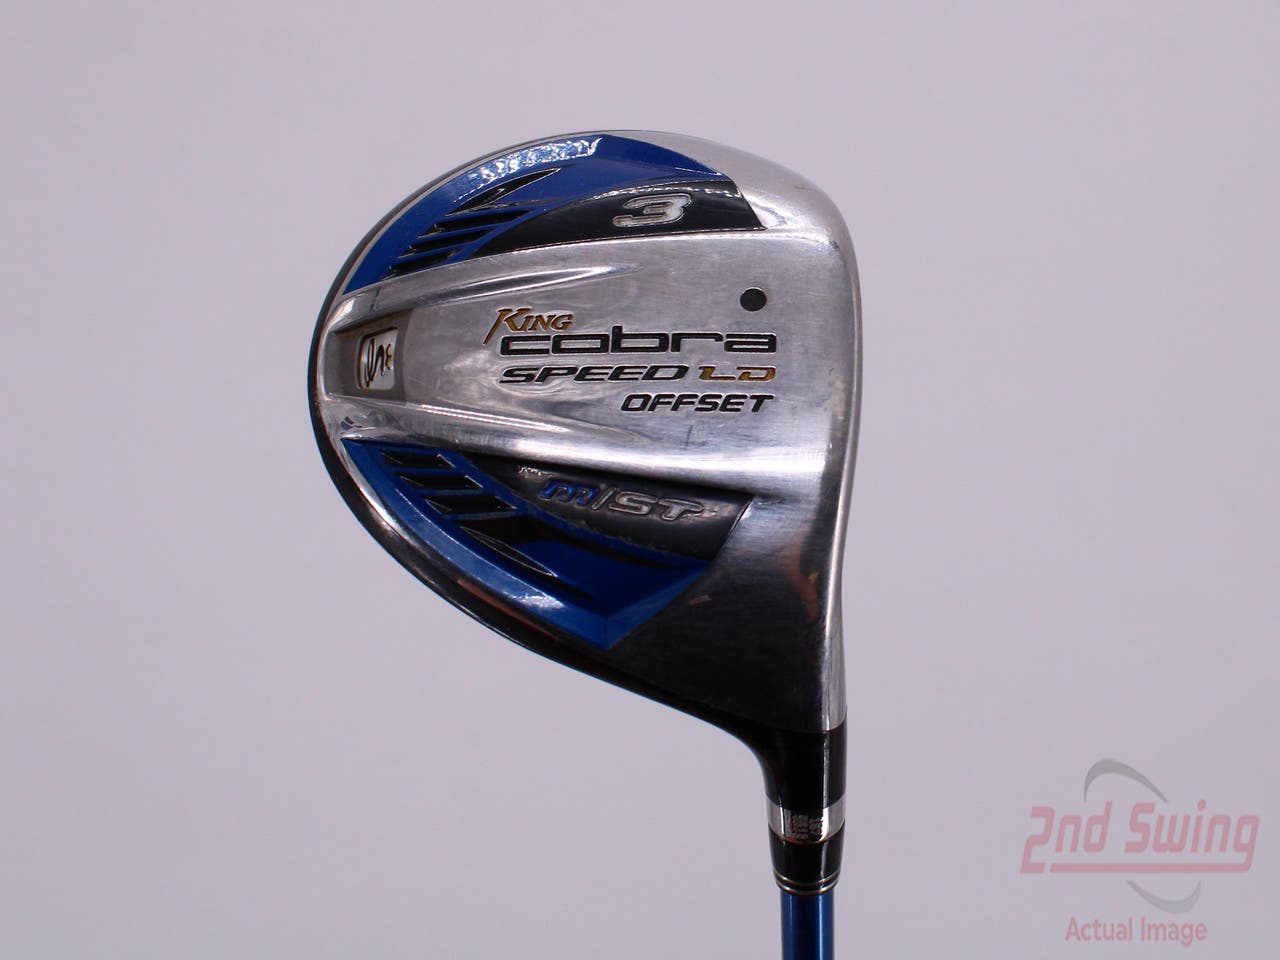 Cobra 2008 Speed LD M OS Fairway Wood 5 Wood 5W Graphite Design Tour AD YS Fwy Graphite Regular Right Handed 43.25in